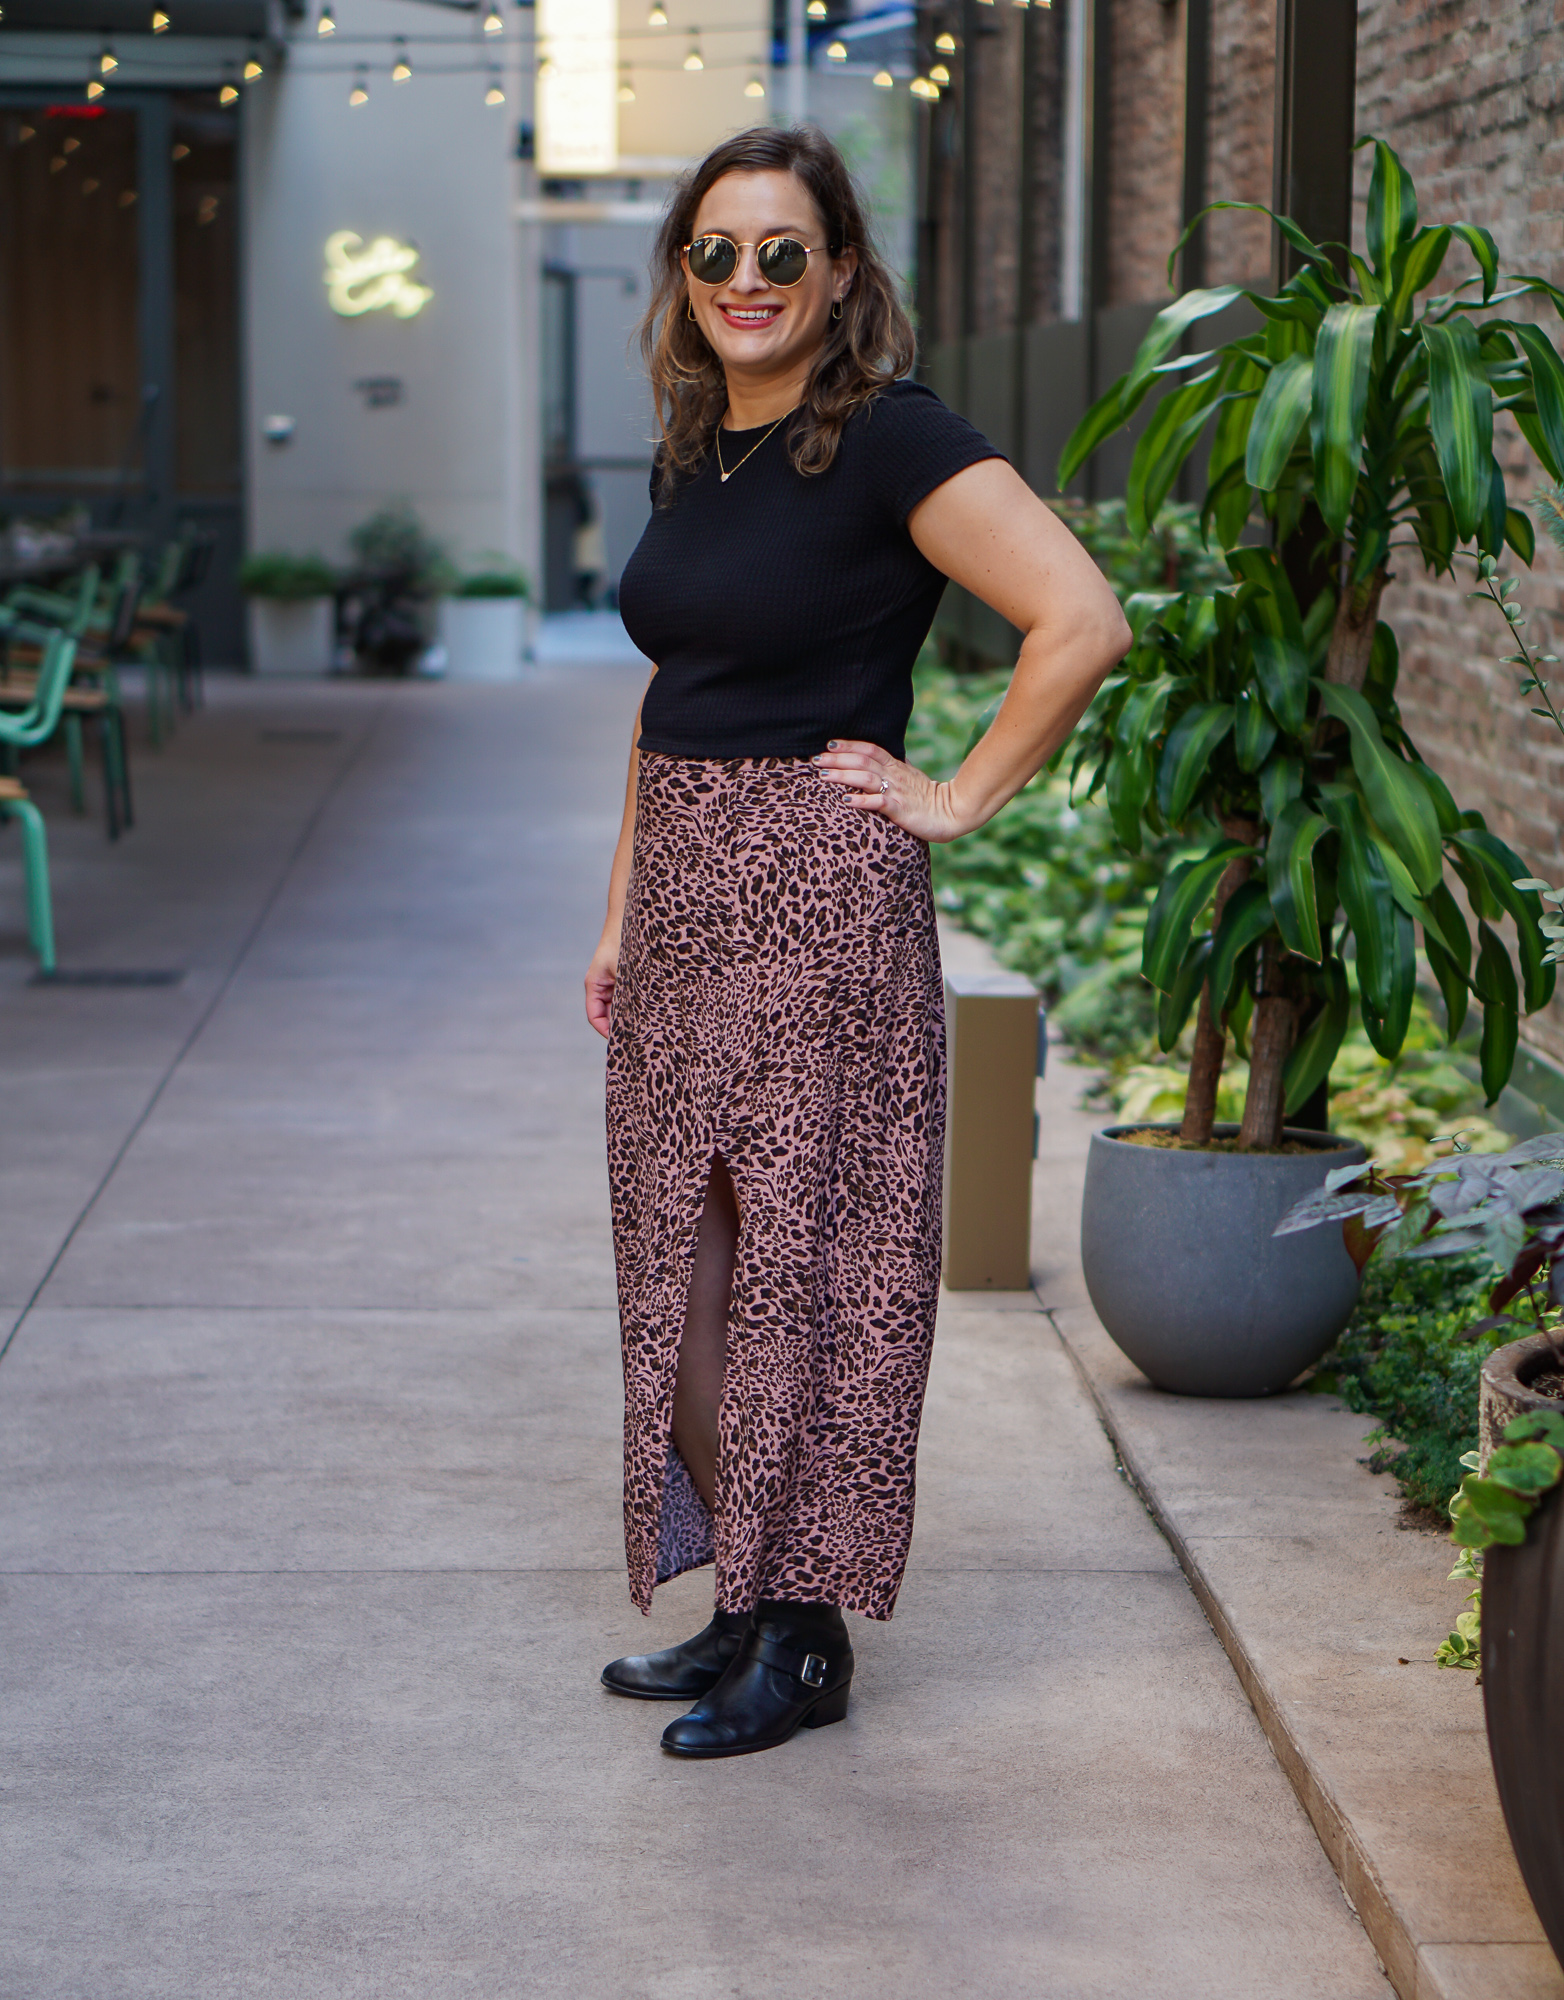 Cropped tee and maxi skirt